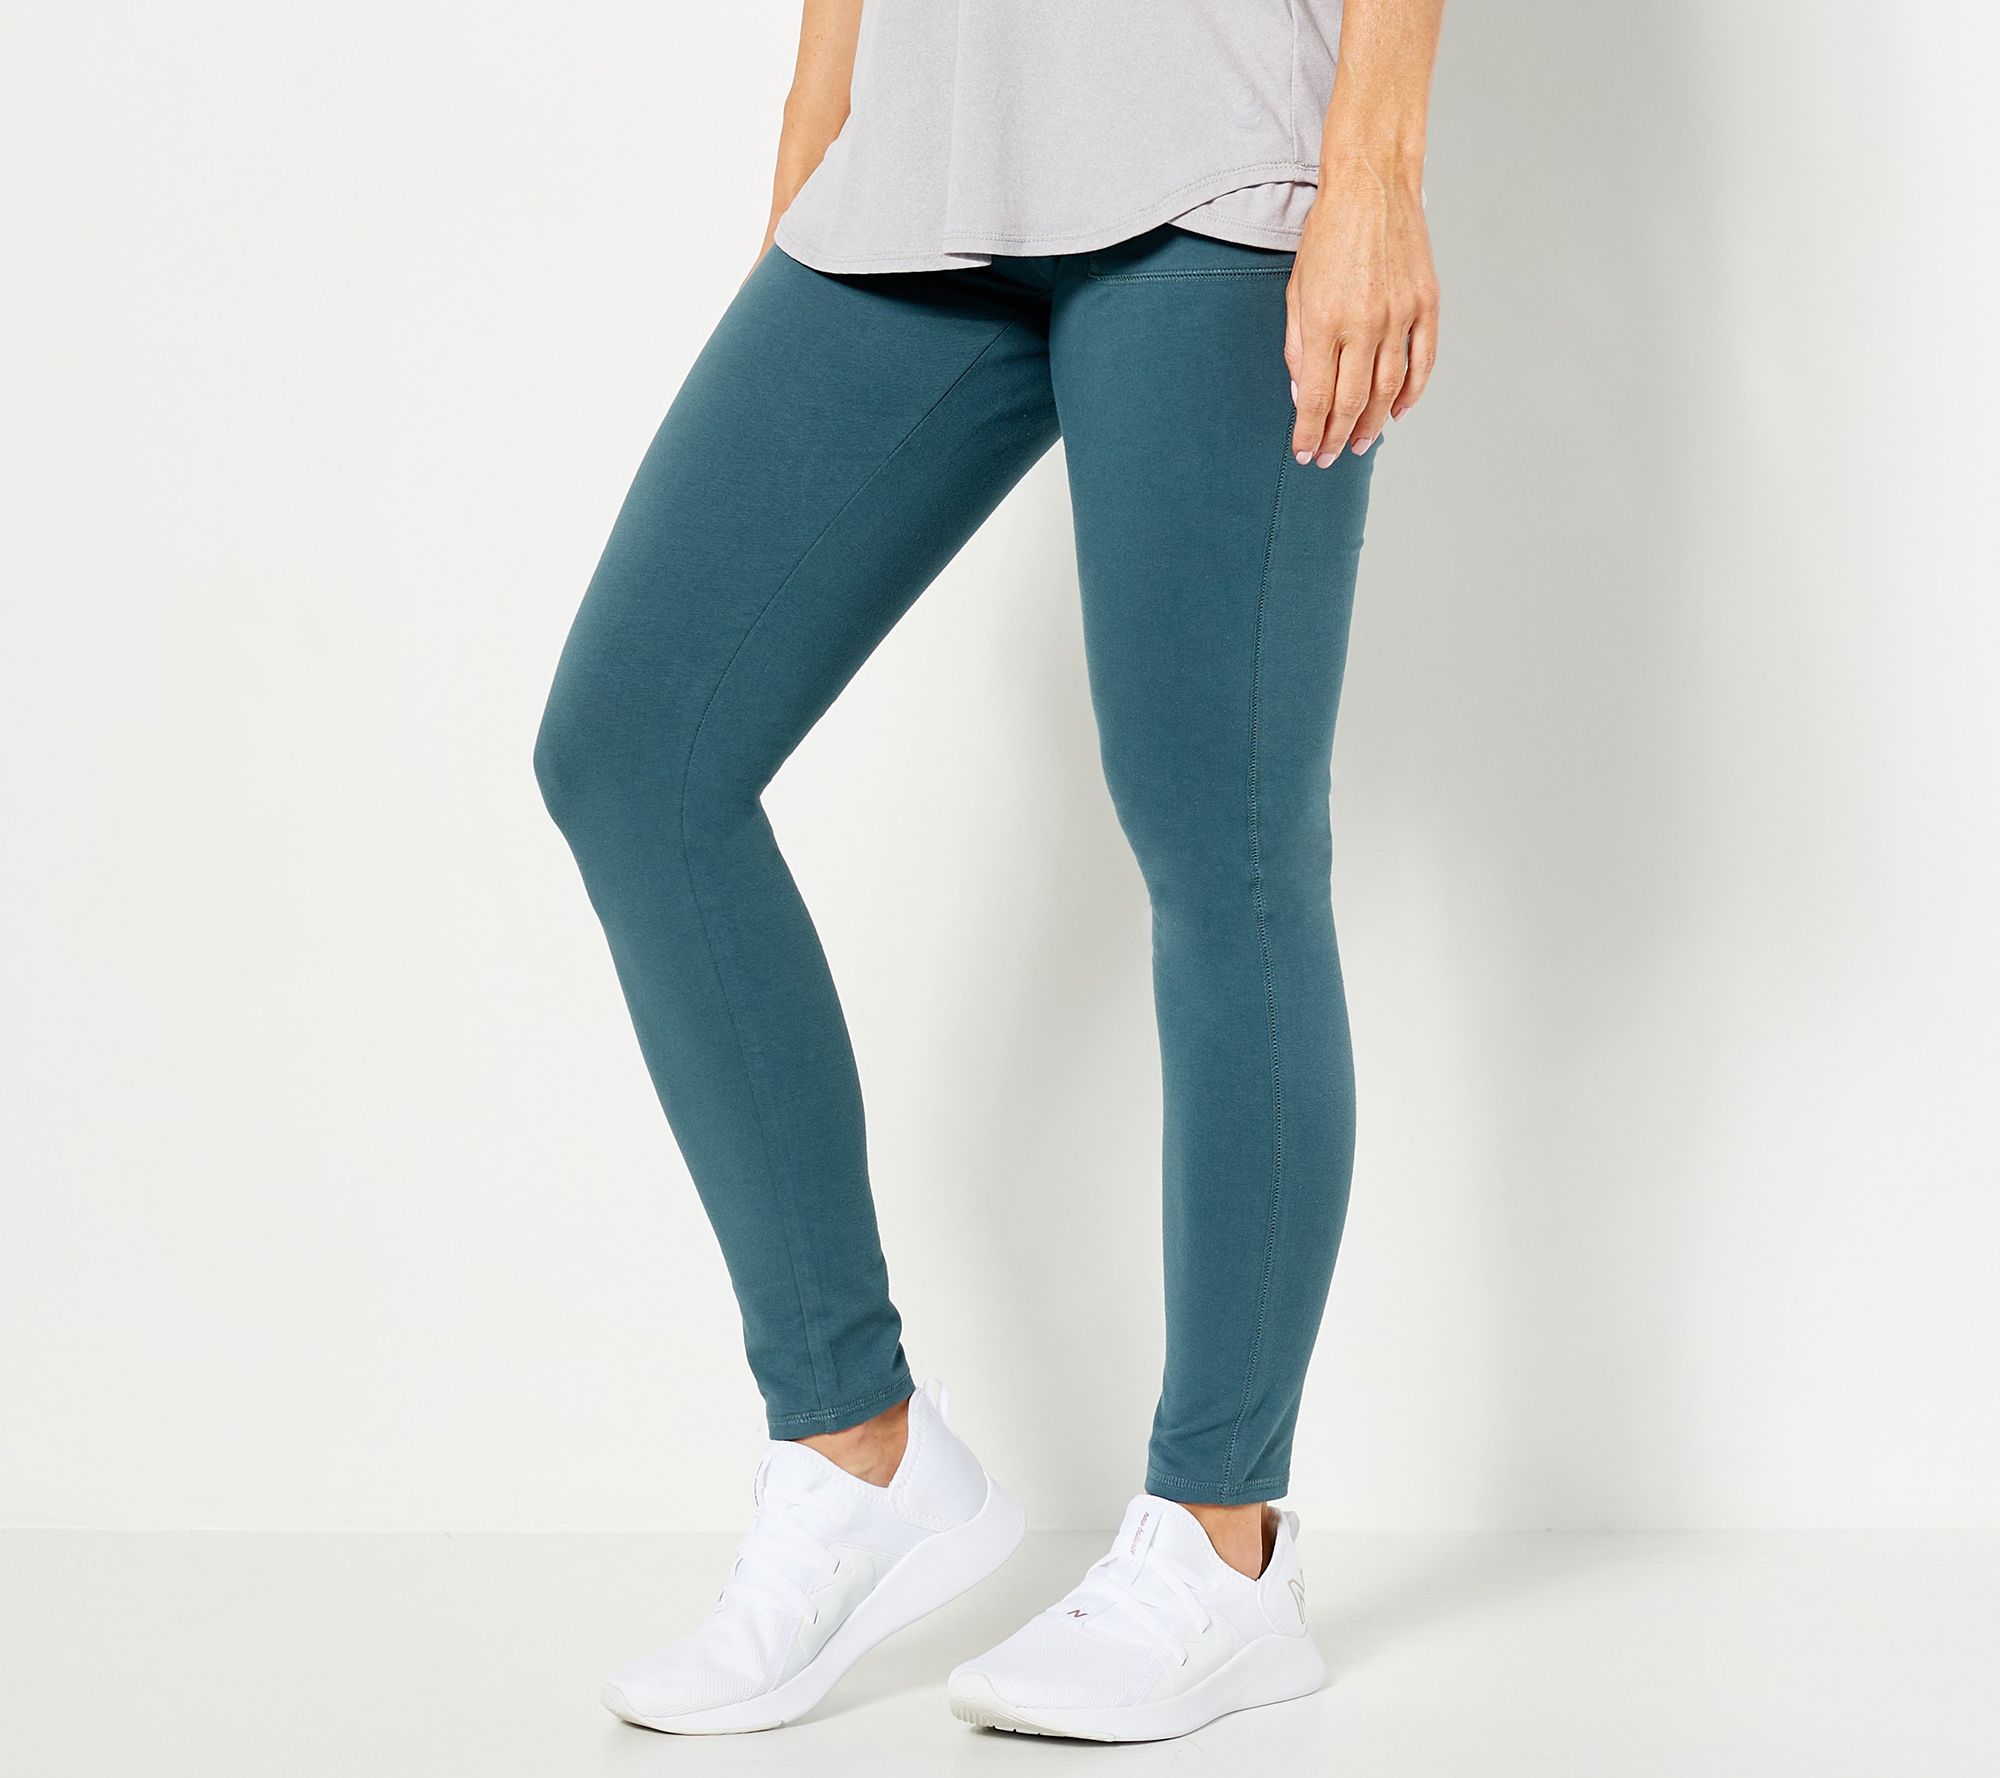 Denim & Co. Active Regulars Duo Stretch Legging with Wide Waistband 